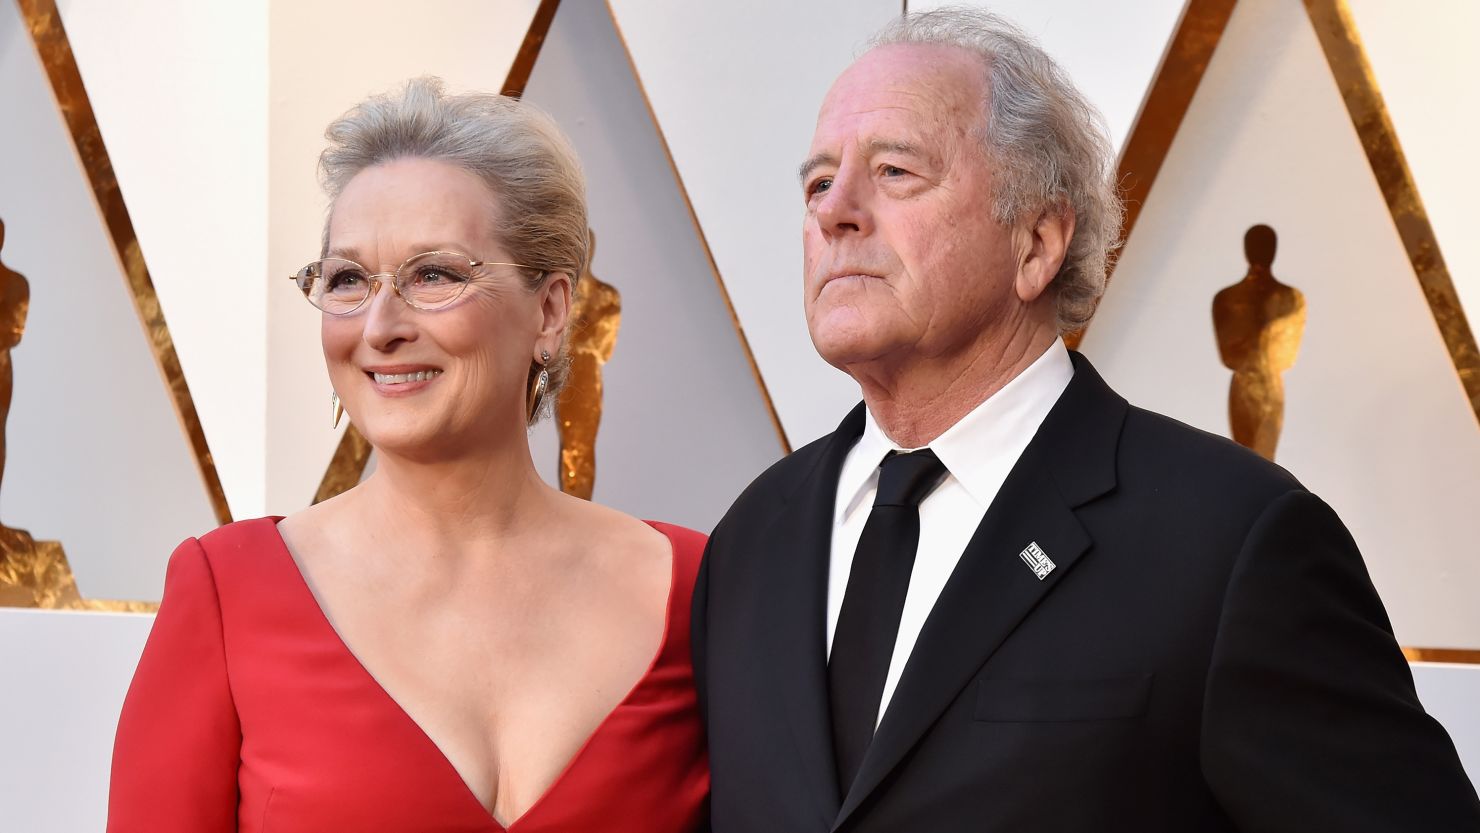 Meryl Streep and Don Gummer attend the 90th Annual Academy Awards in 2018.